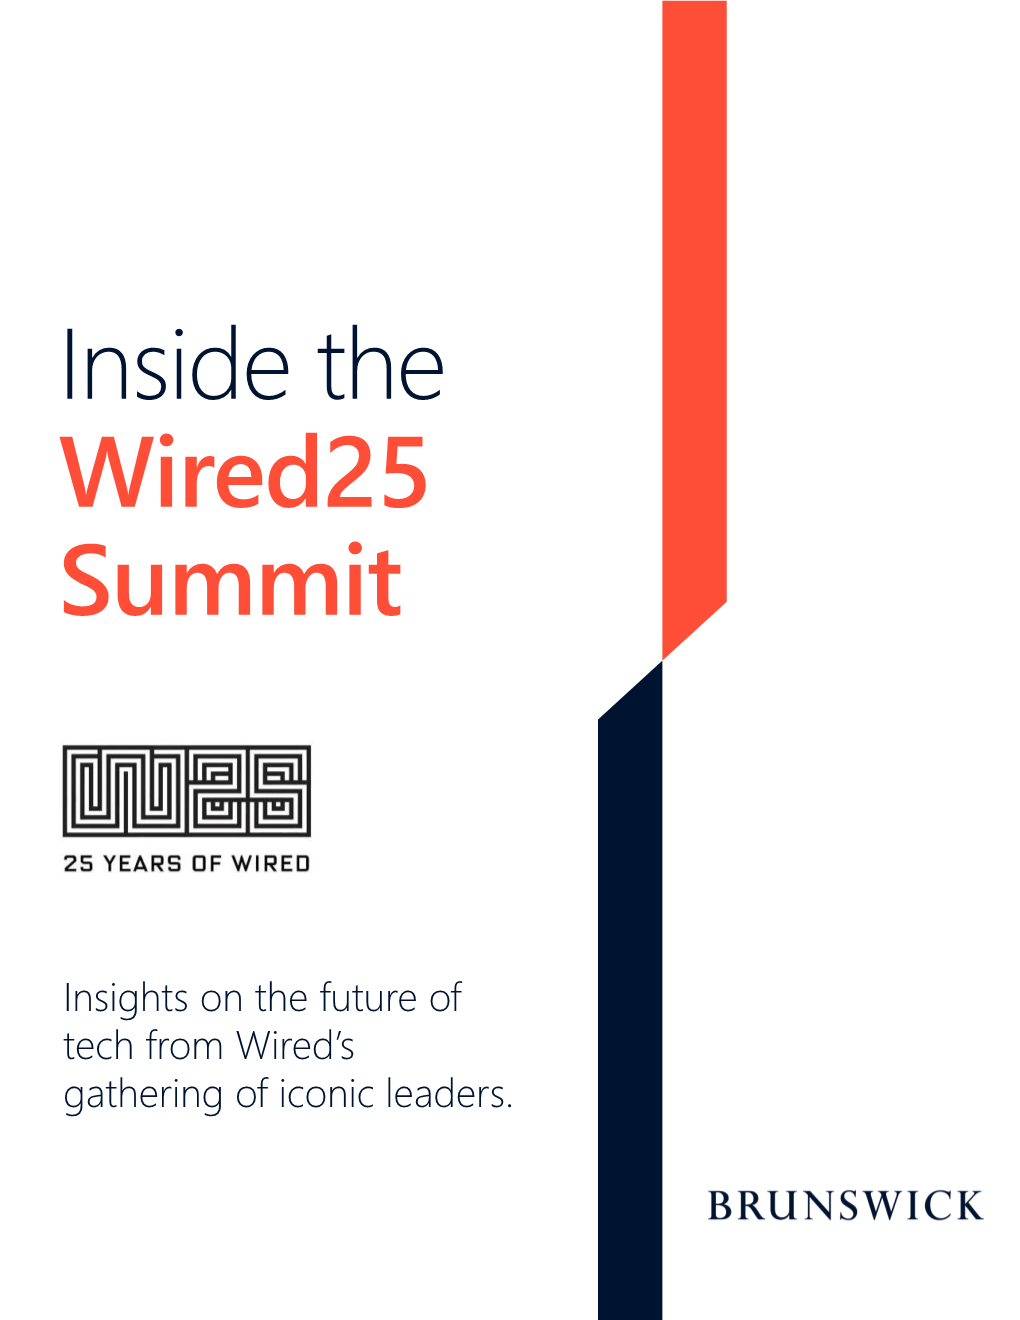 Inside the Wired25 Summit